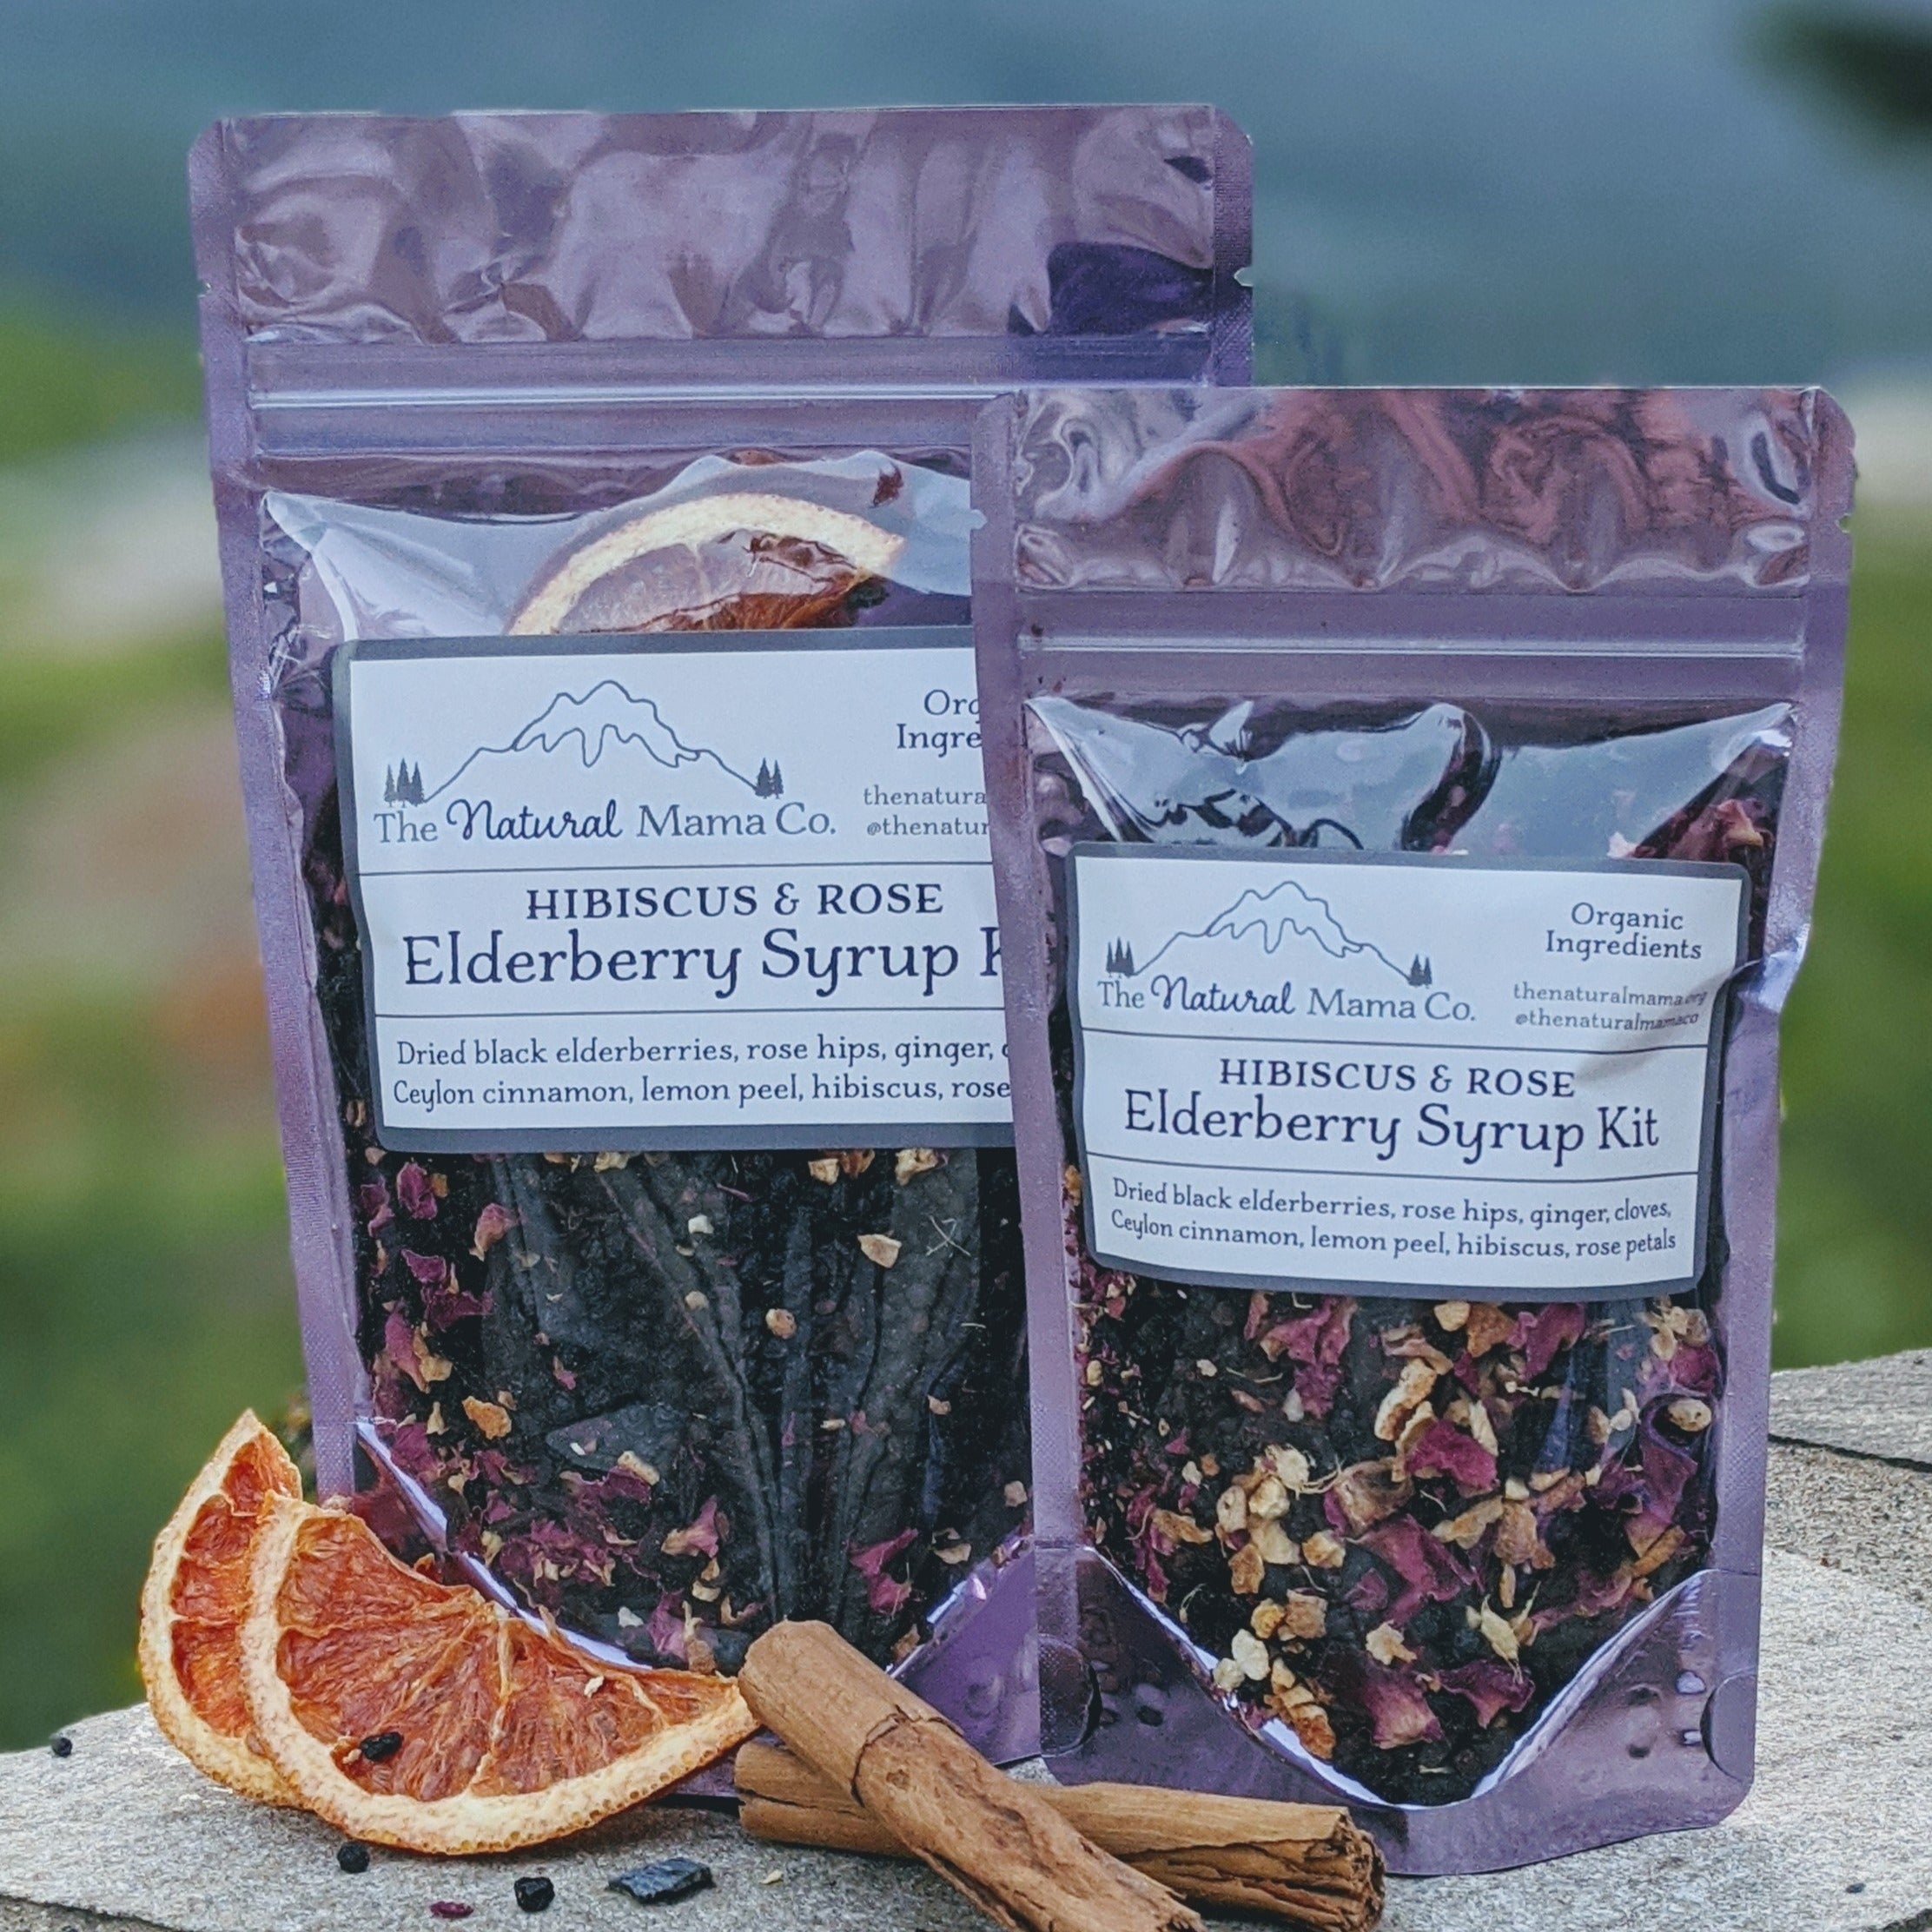 Super Sized Elderberry Syrup Kit - Hibiscus & Rose